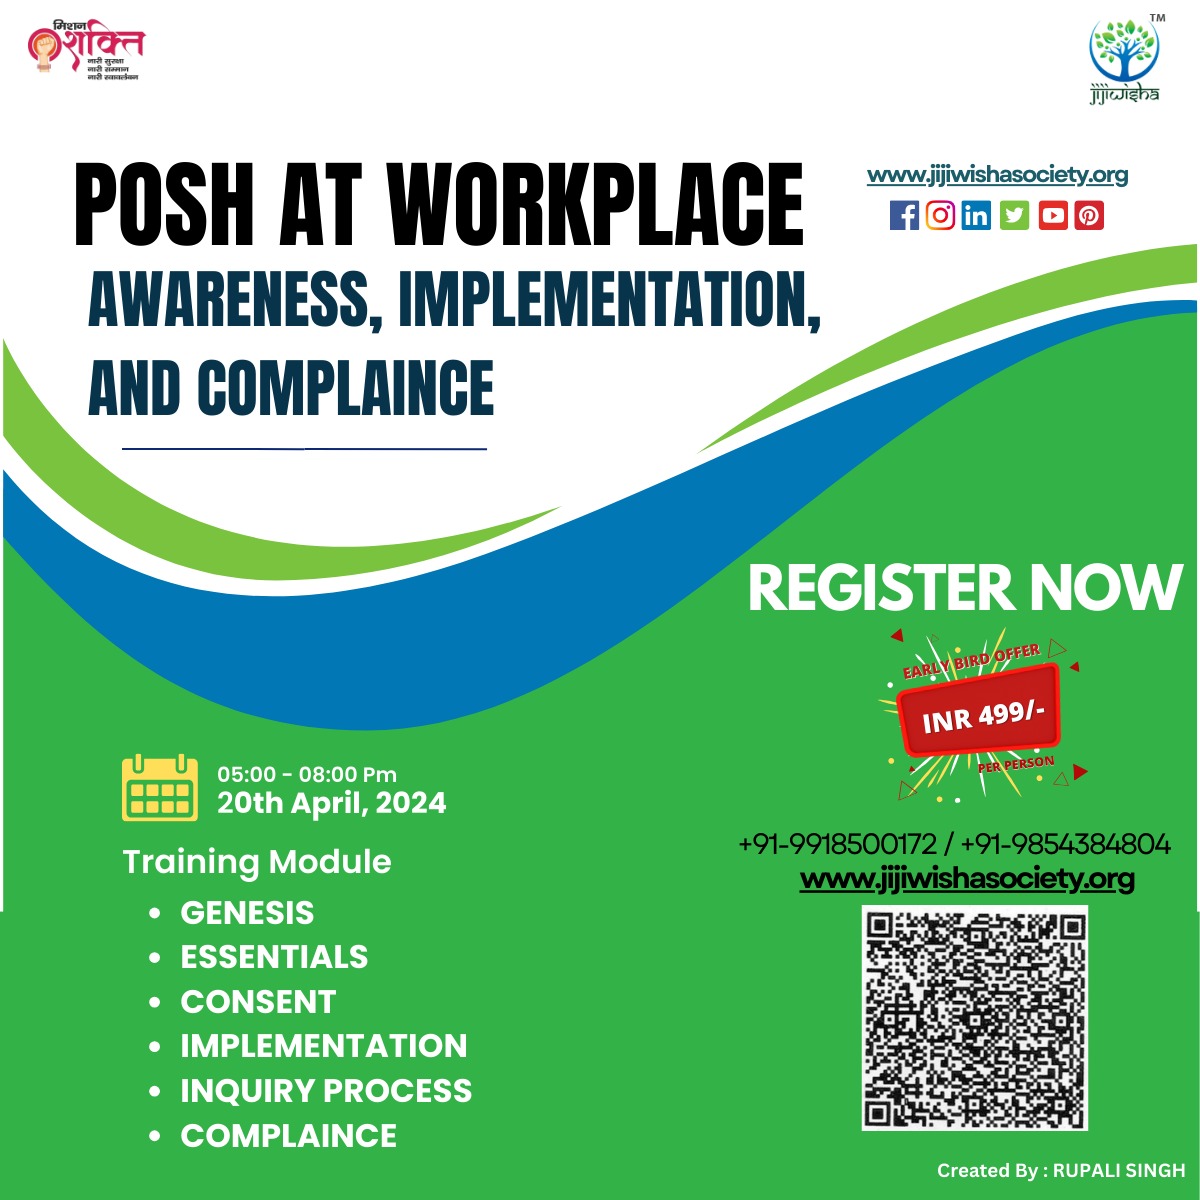 Curious to know how simple steps can create a safer workplace?
Join us for a unique session on raising awareness about the #POSHAct! gain exclusive access to insights strategies & practical tips to foster respectful work environment
#jijiwishasociety
#POSHAwareness
#SafeWorkplace